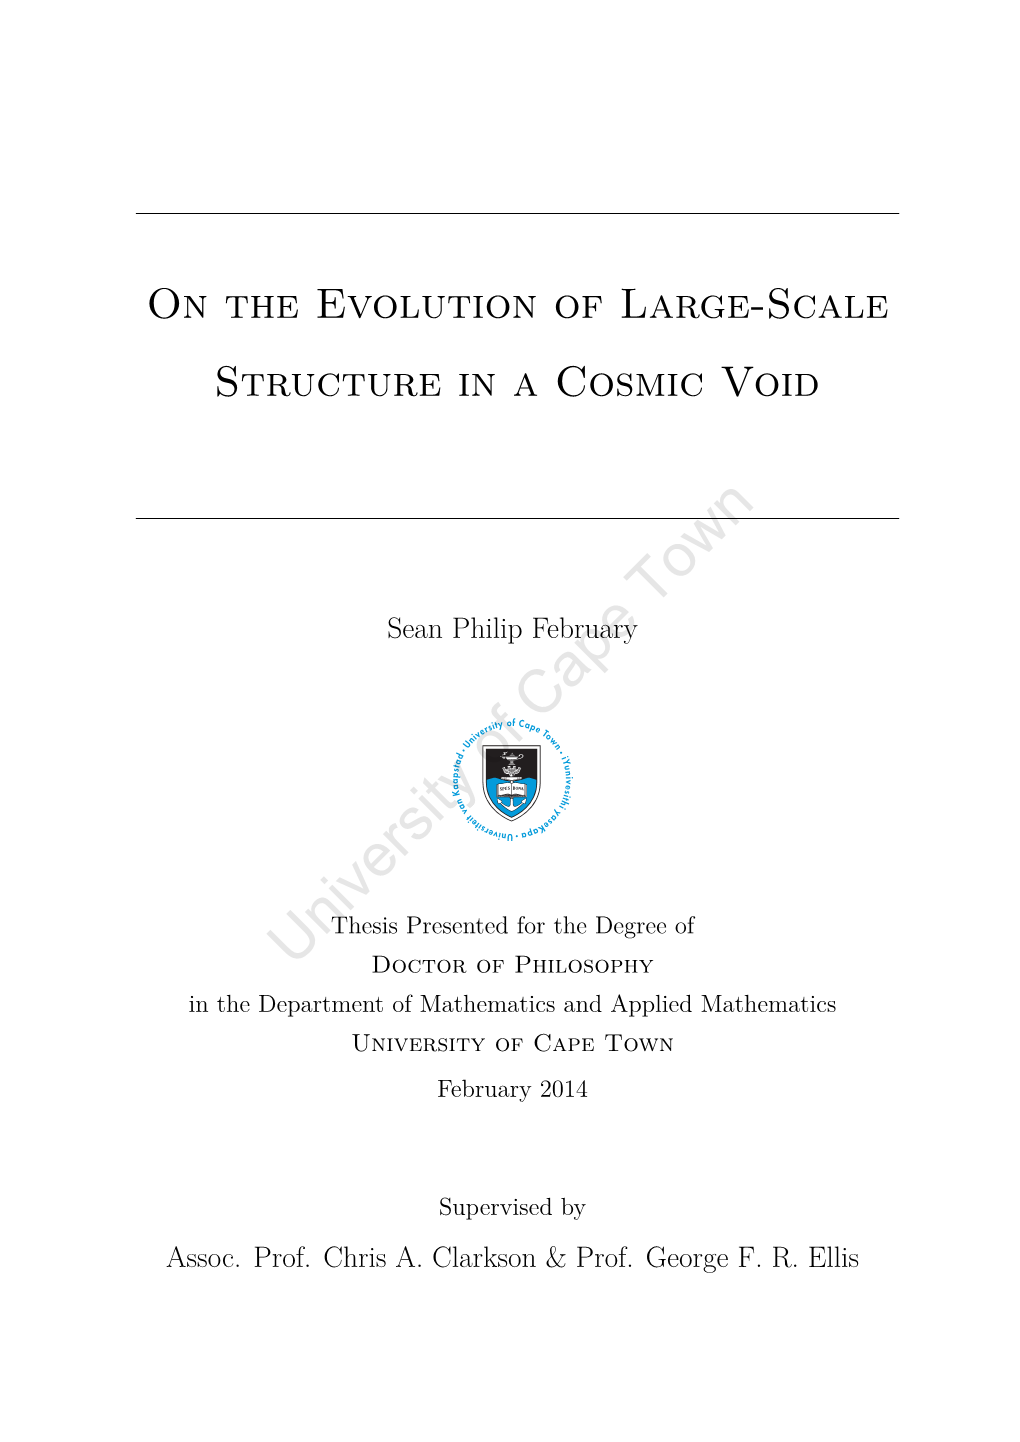 On the Evolution of Large-Scale Structure in a Cosmic Void